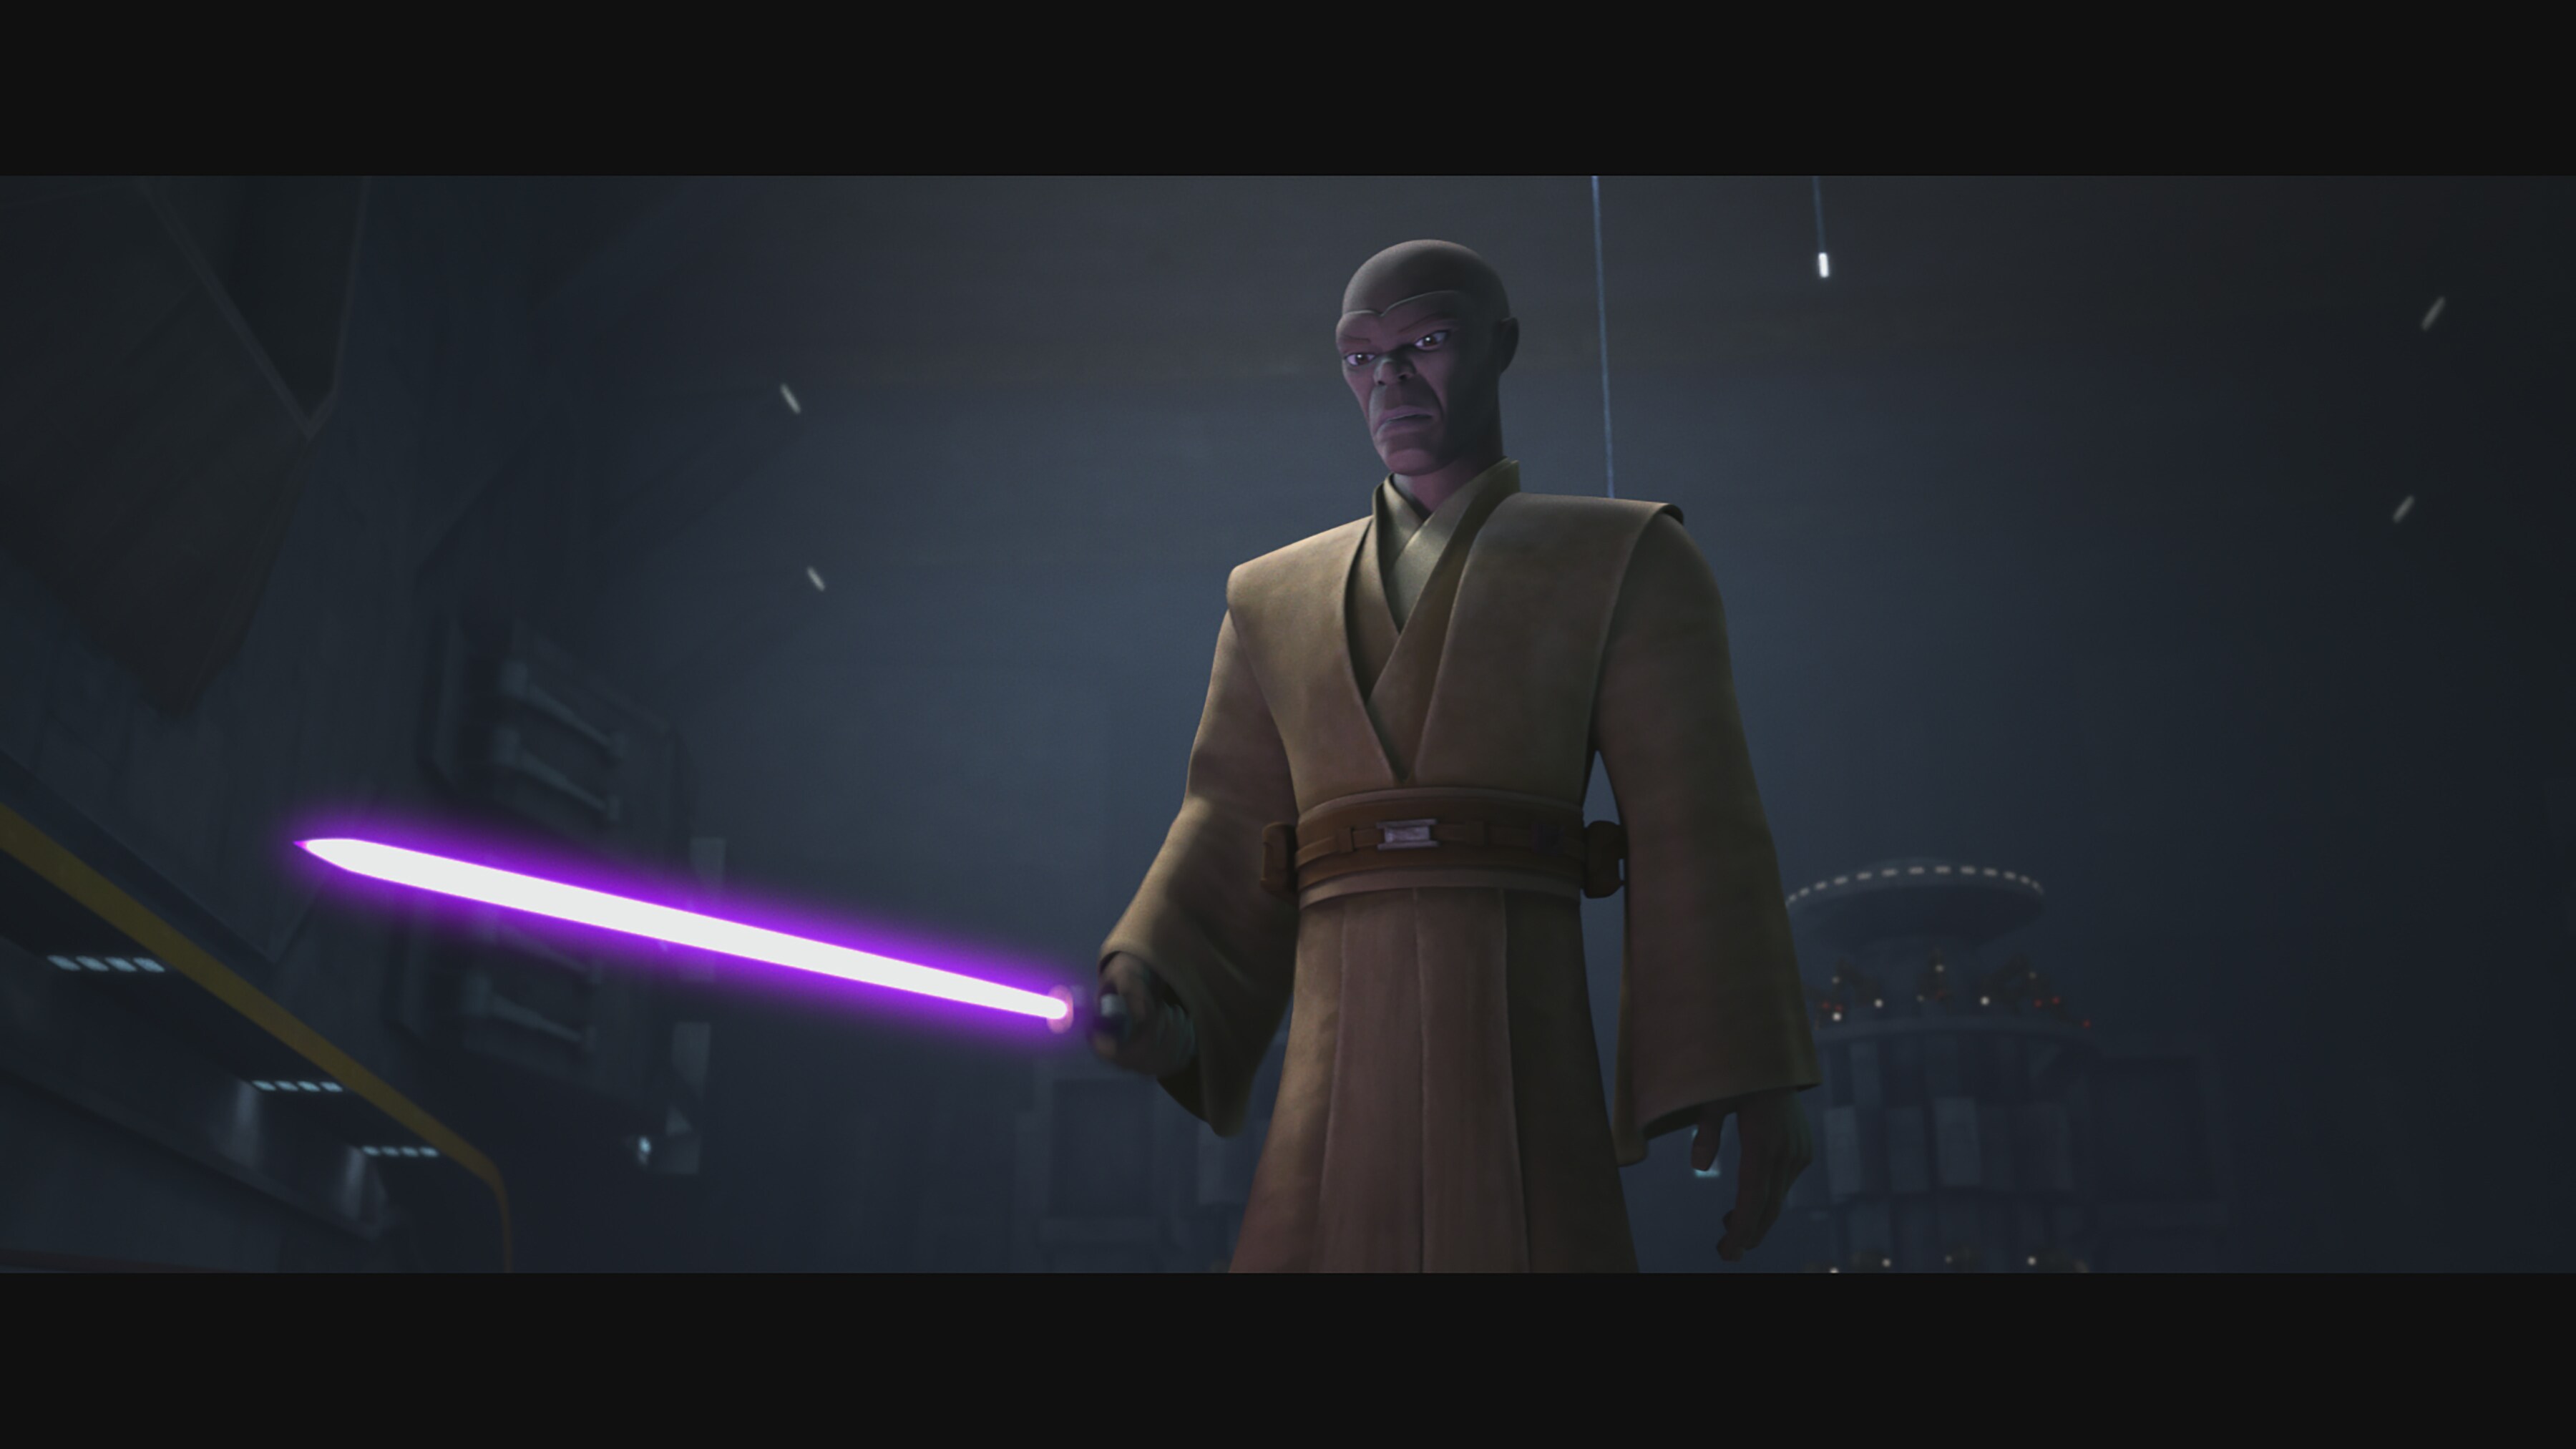 Jedi Mace Windu addresses the battle droids in STAR WARS: THE CLONE WARS, exclusively on Disney+.